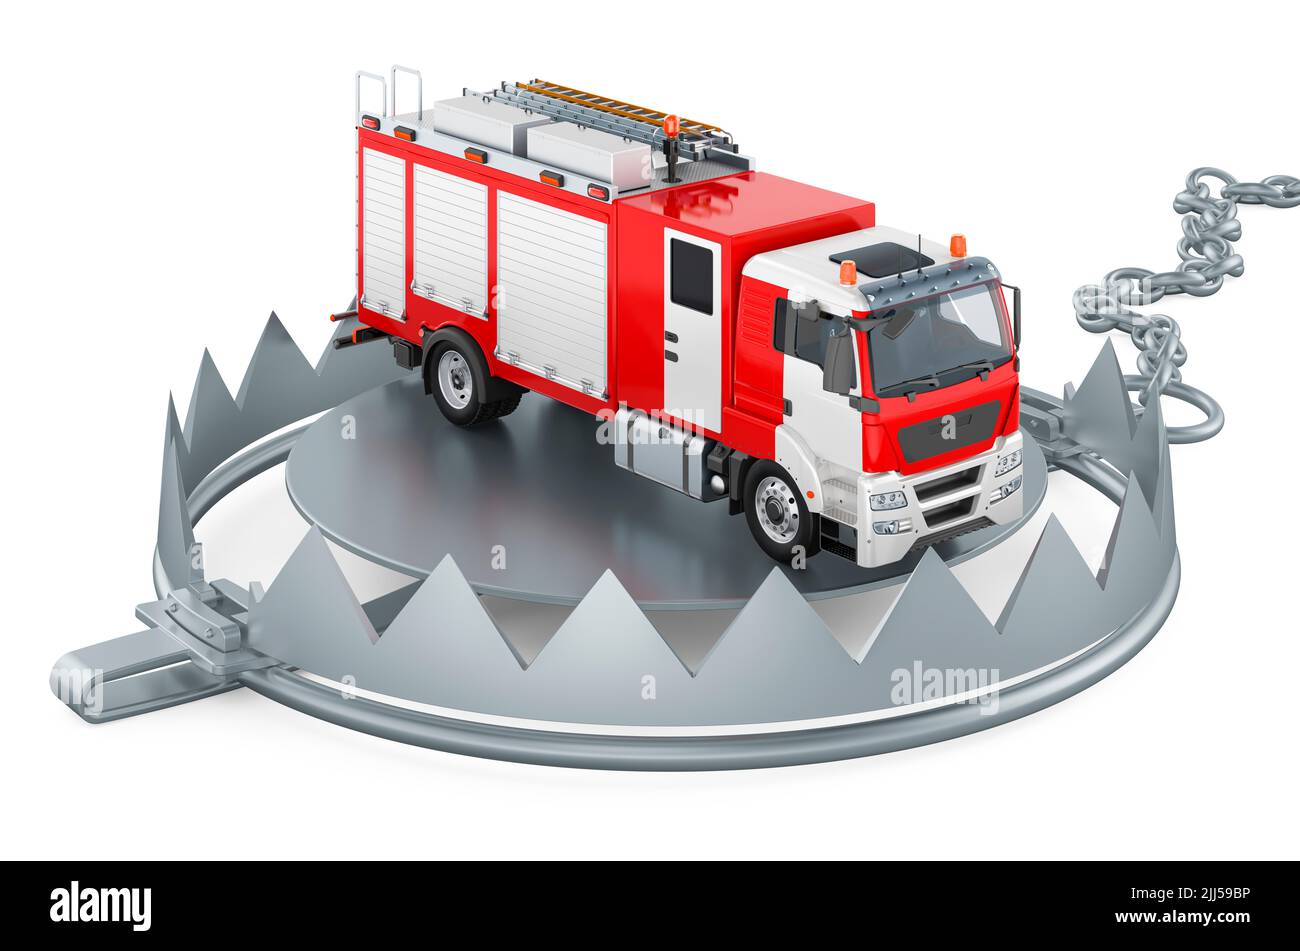 Bear trap with fire engine. 3D rendering isolated on white background Stock Photo